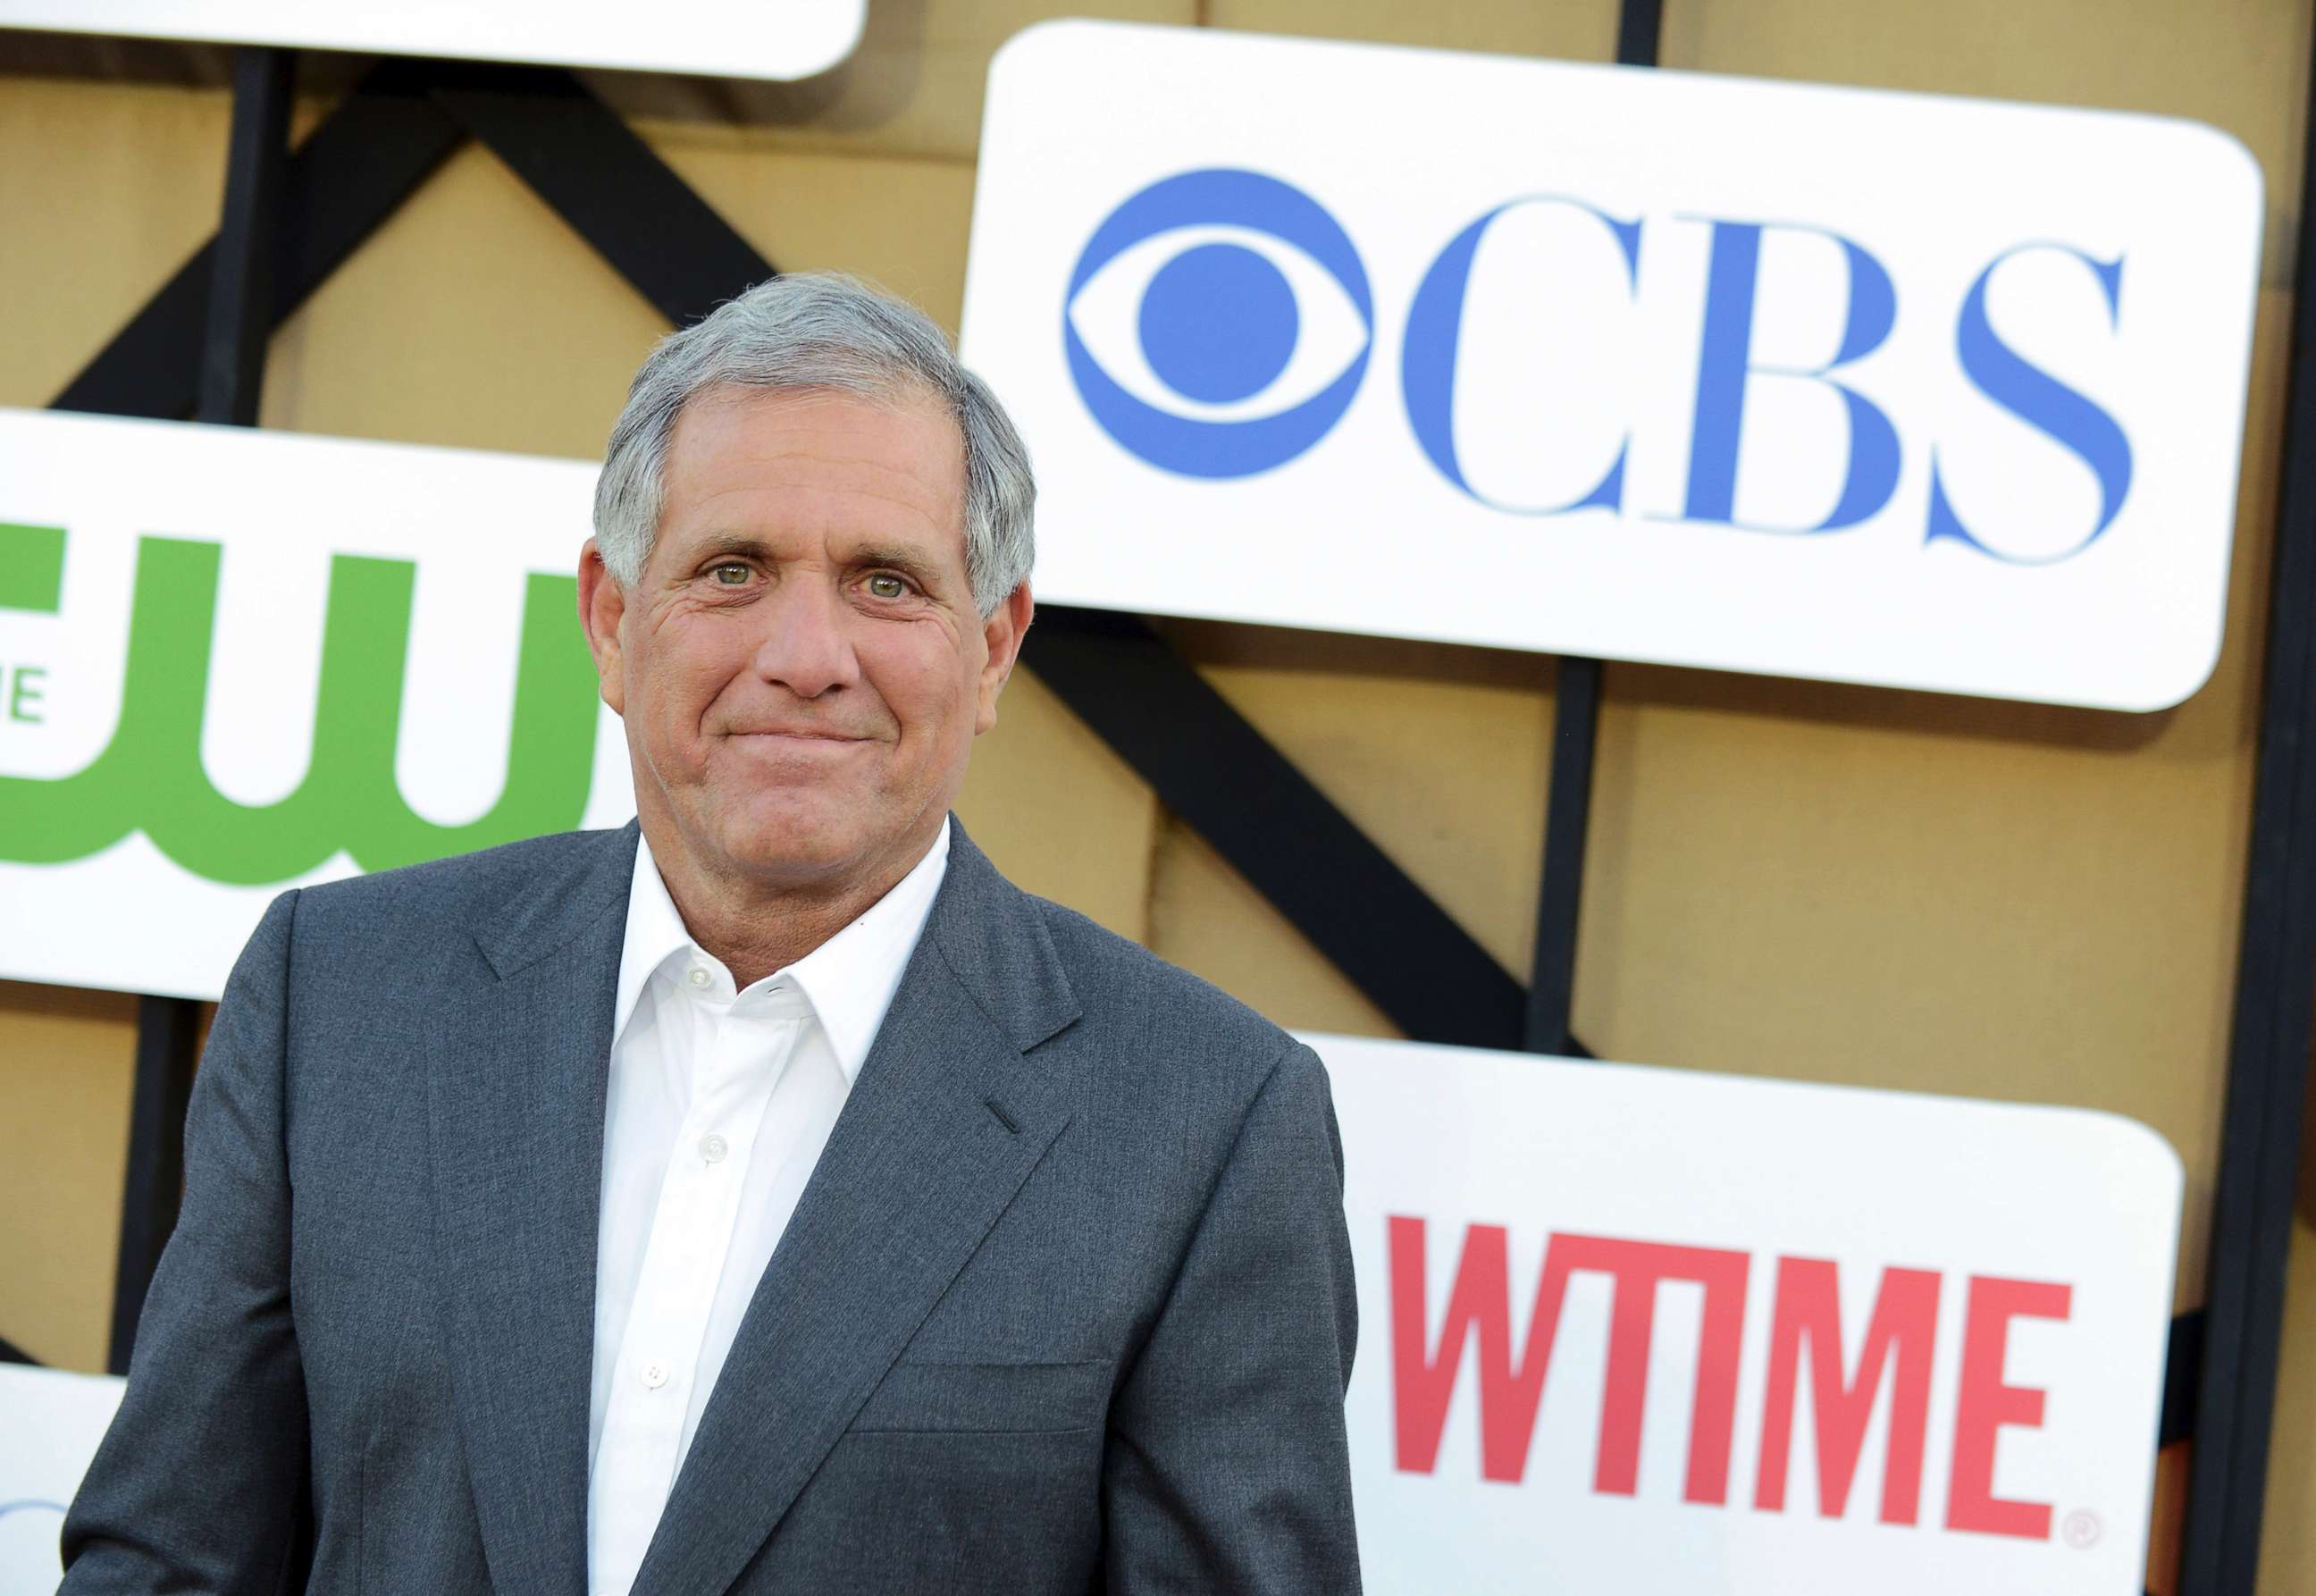 PHOTO: In this July 29, 2013, file photo, Les Moonves arrives an event in Beverly Hills, Calif.